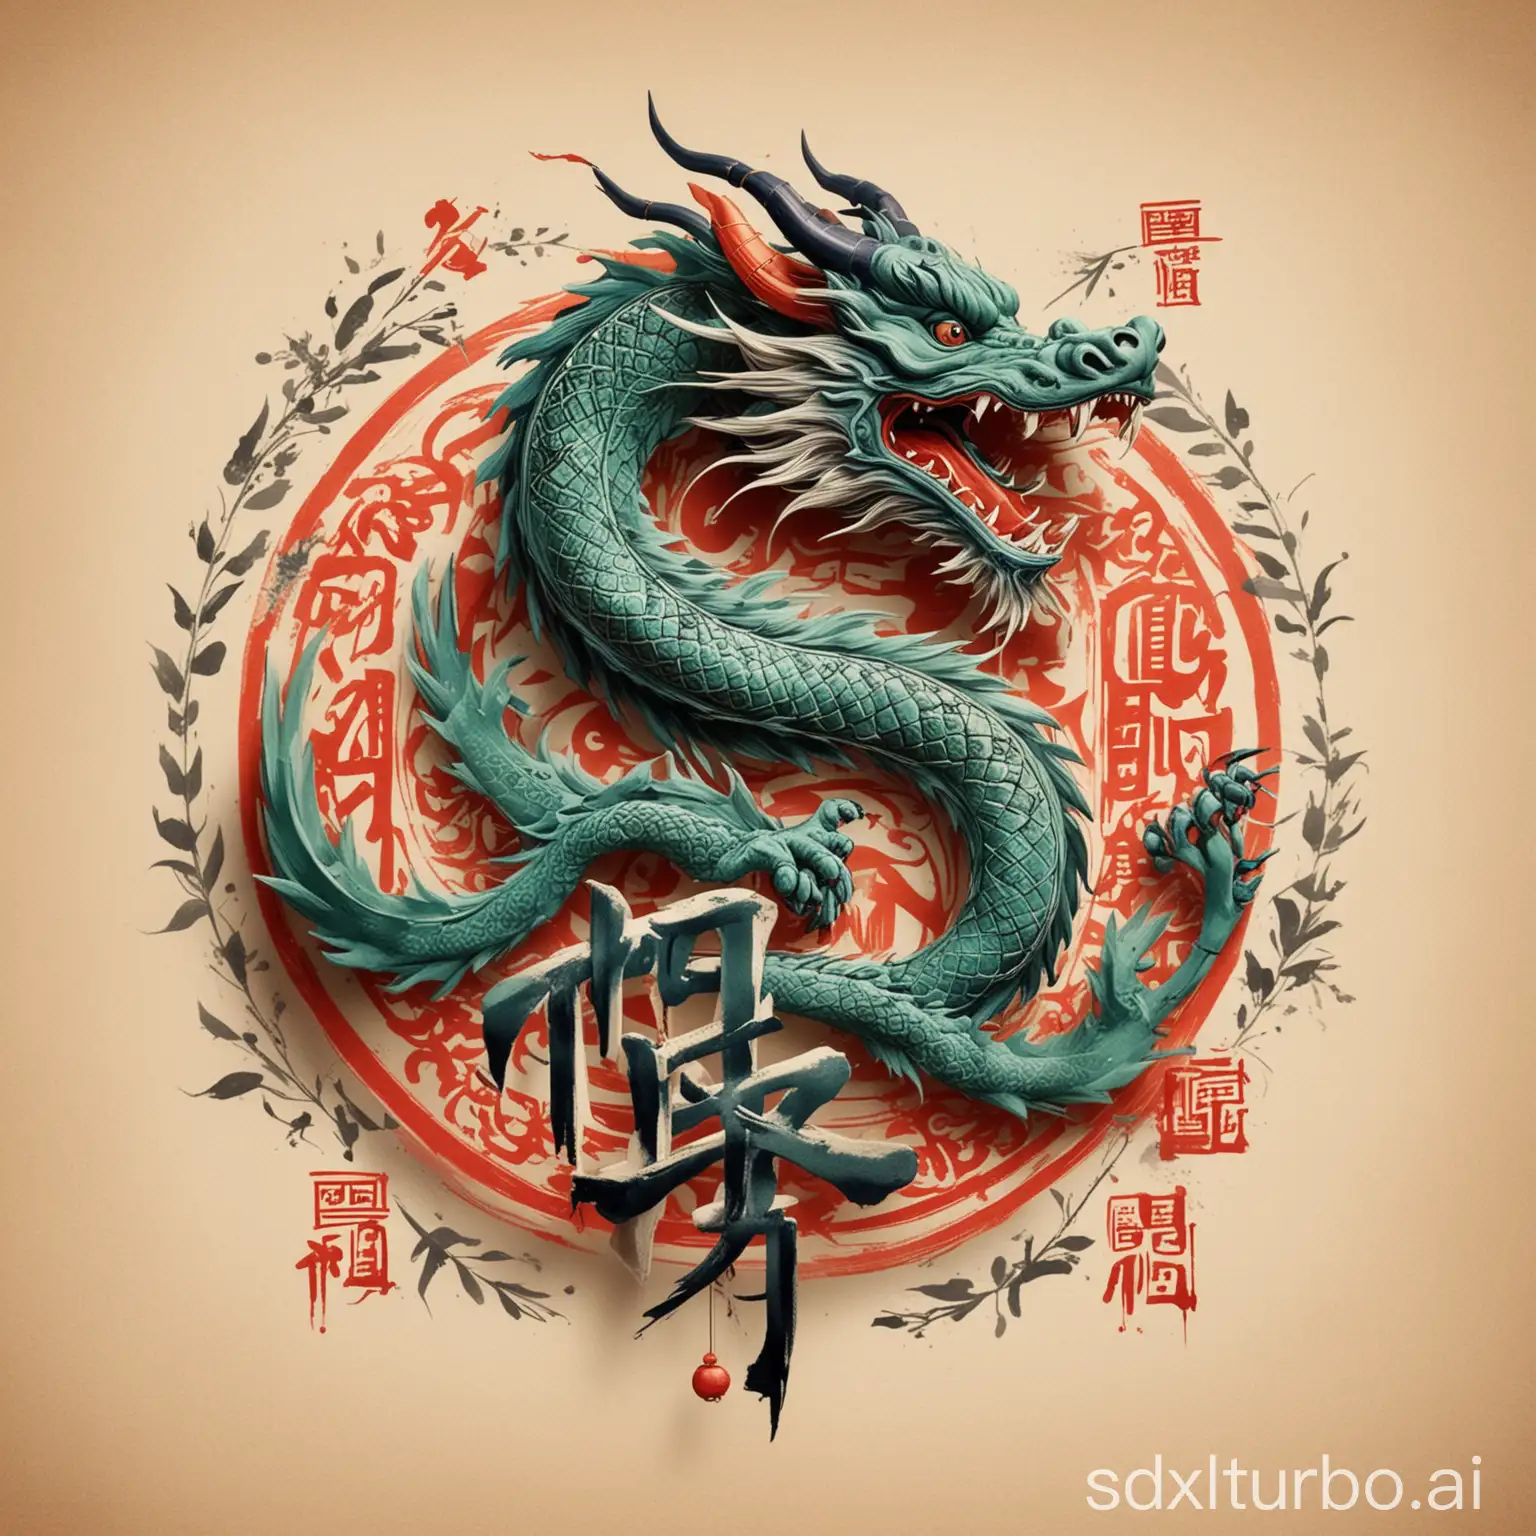 a traditional dragon, calligraphy, bamboo, and iconic symbols. The design should blend vibrant colors and modern typography on a simple background, creating a contemporary yet respectful representation of traditional Chinese aesthetics